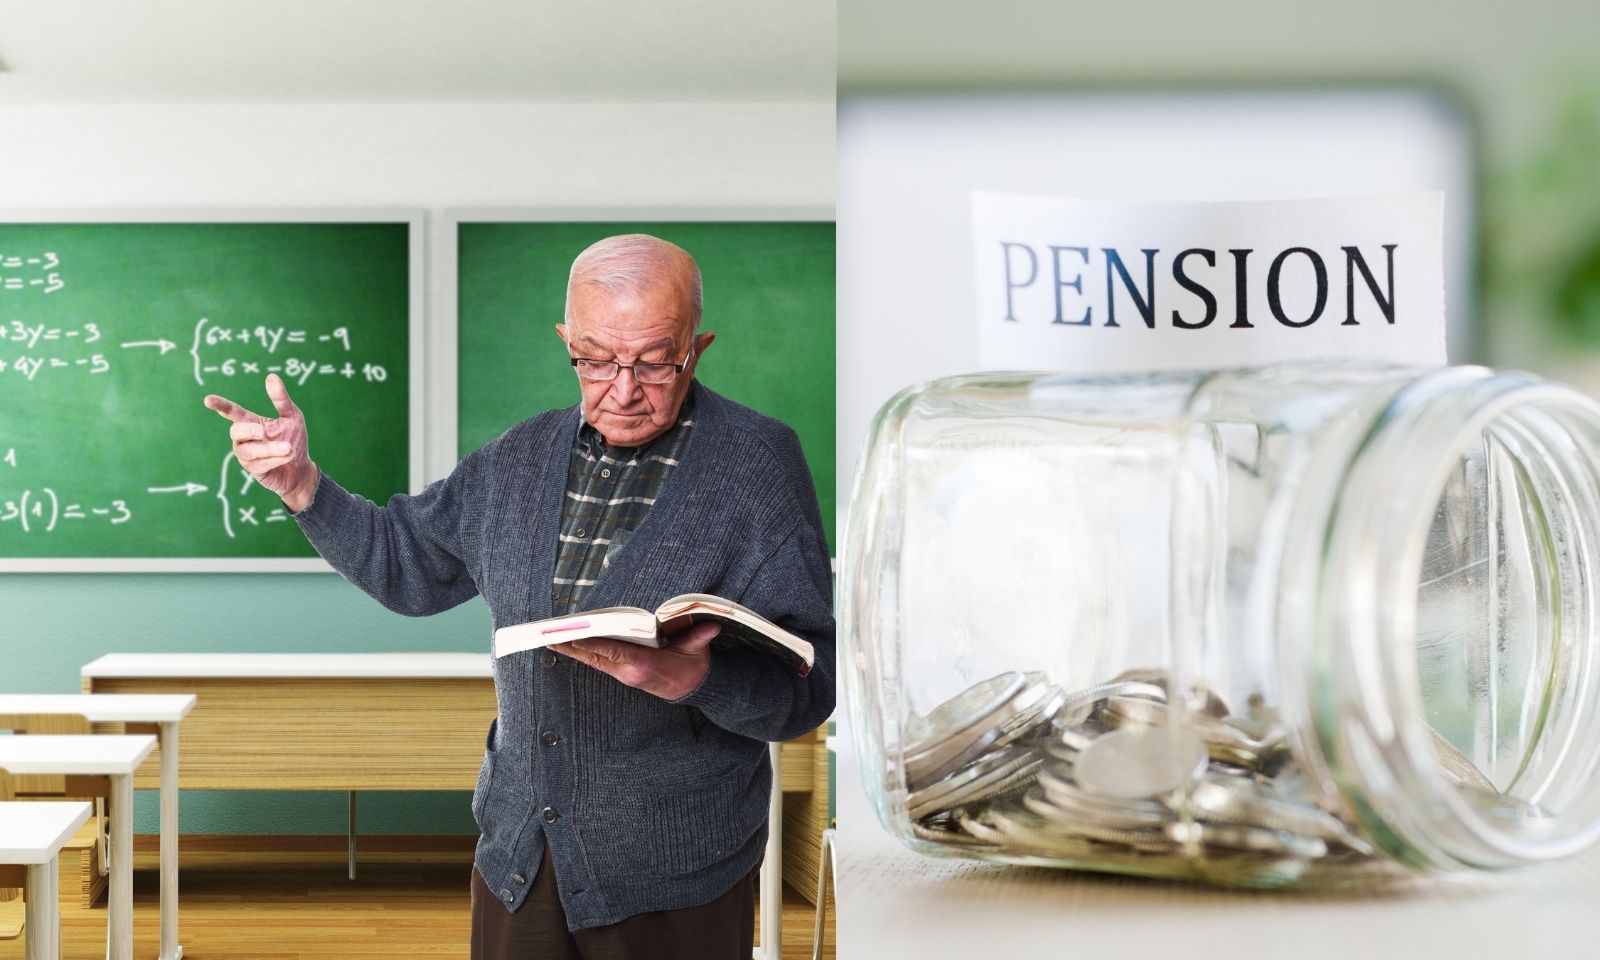 Teachers’ Pension Instructions to finalize documents three months before the retirement